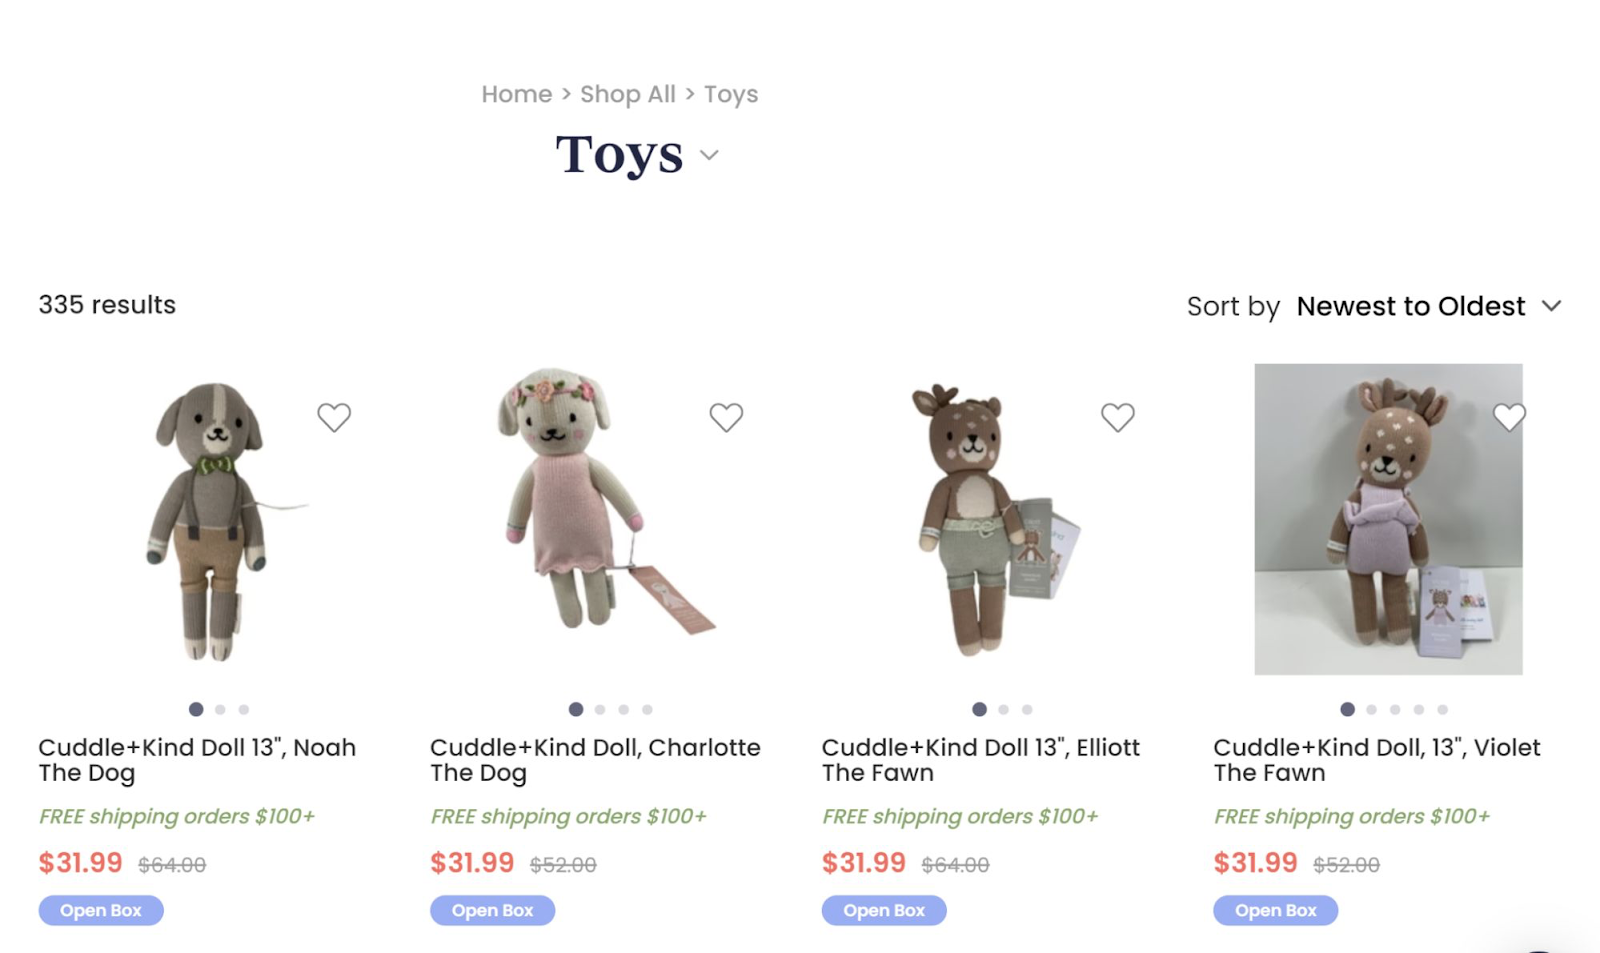 Toys product listings on Goodbye Gear